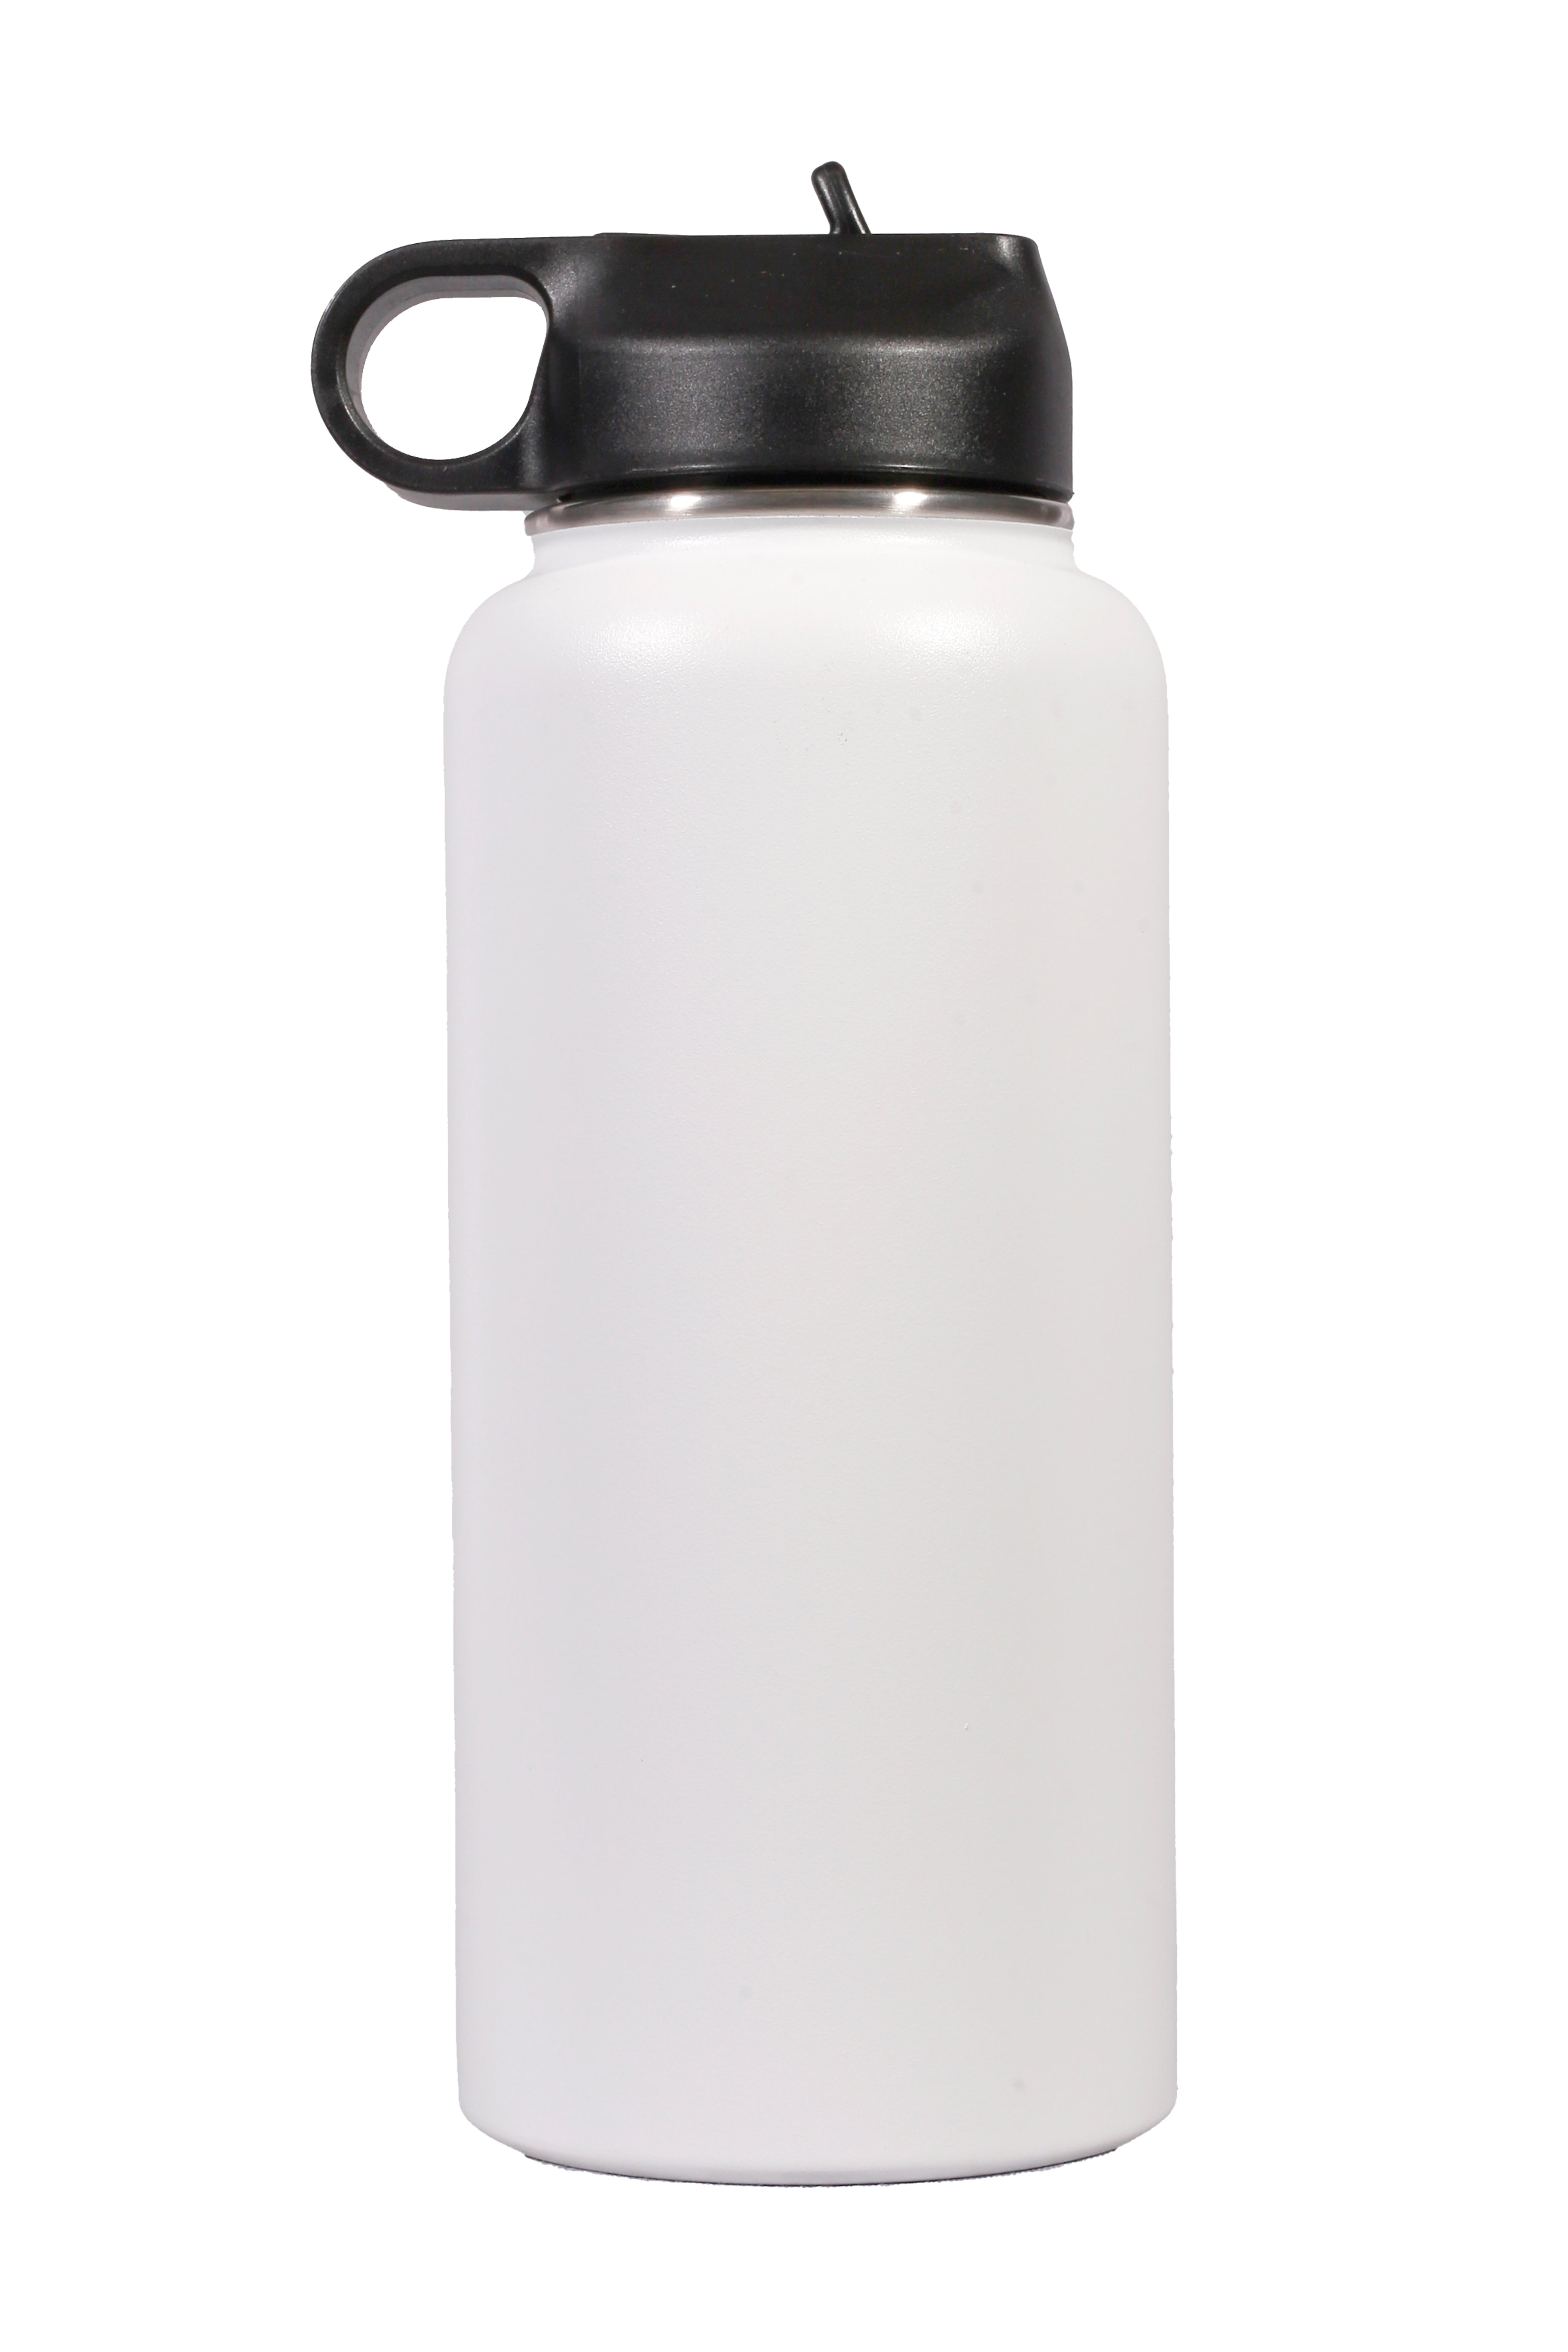 32 oz. Insulated Stainless Steel Water Bottle with Flip Top Lid & Straw